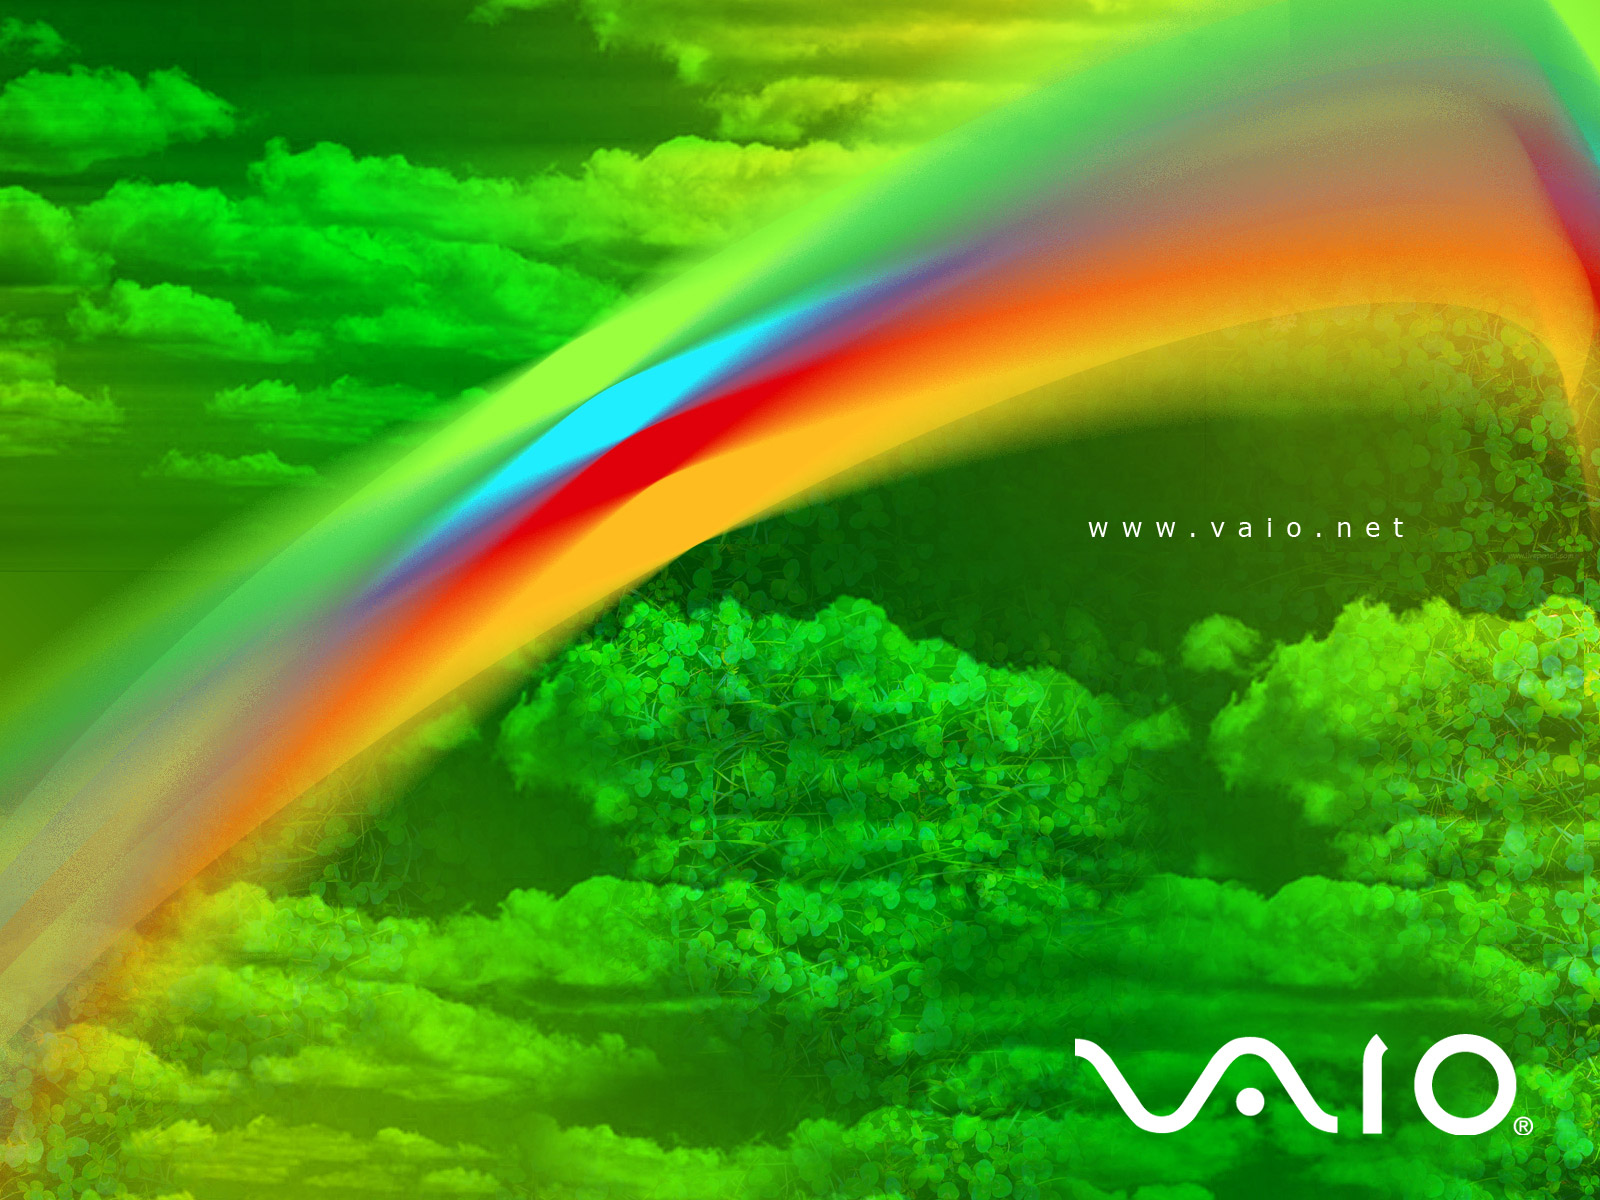 HD Sony Vaio Wallpaper Background For